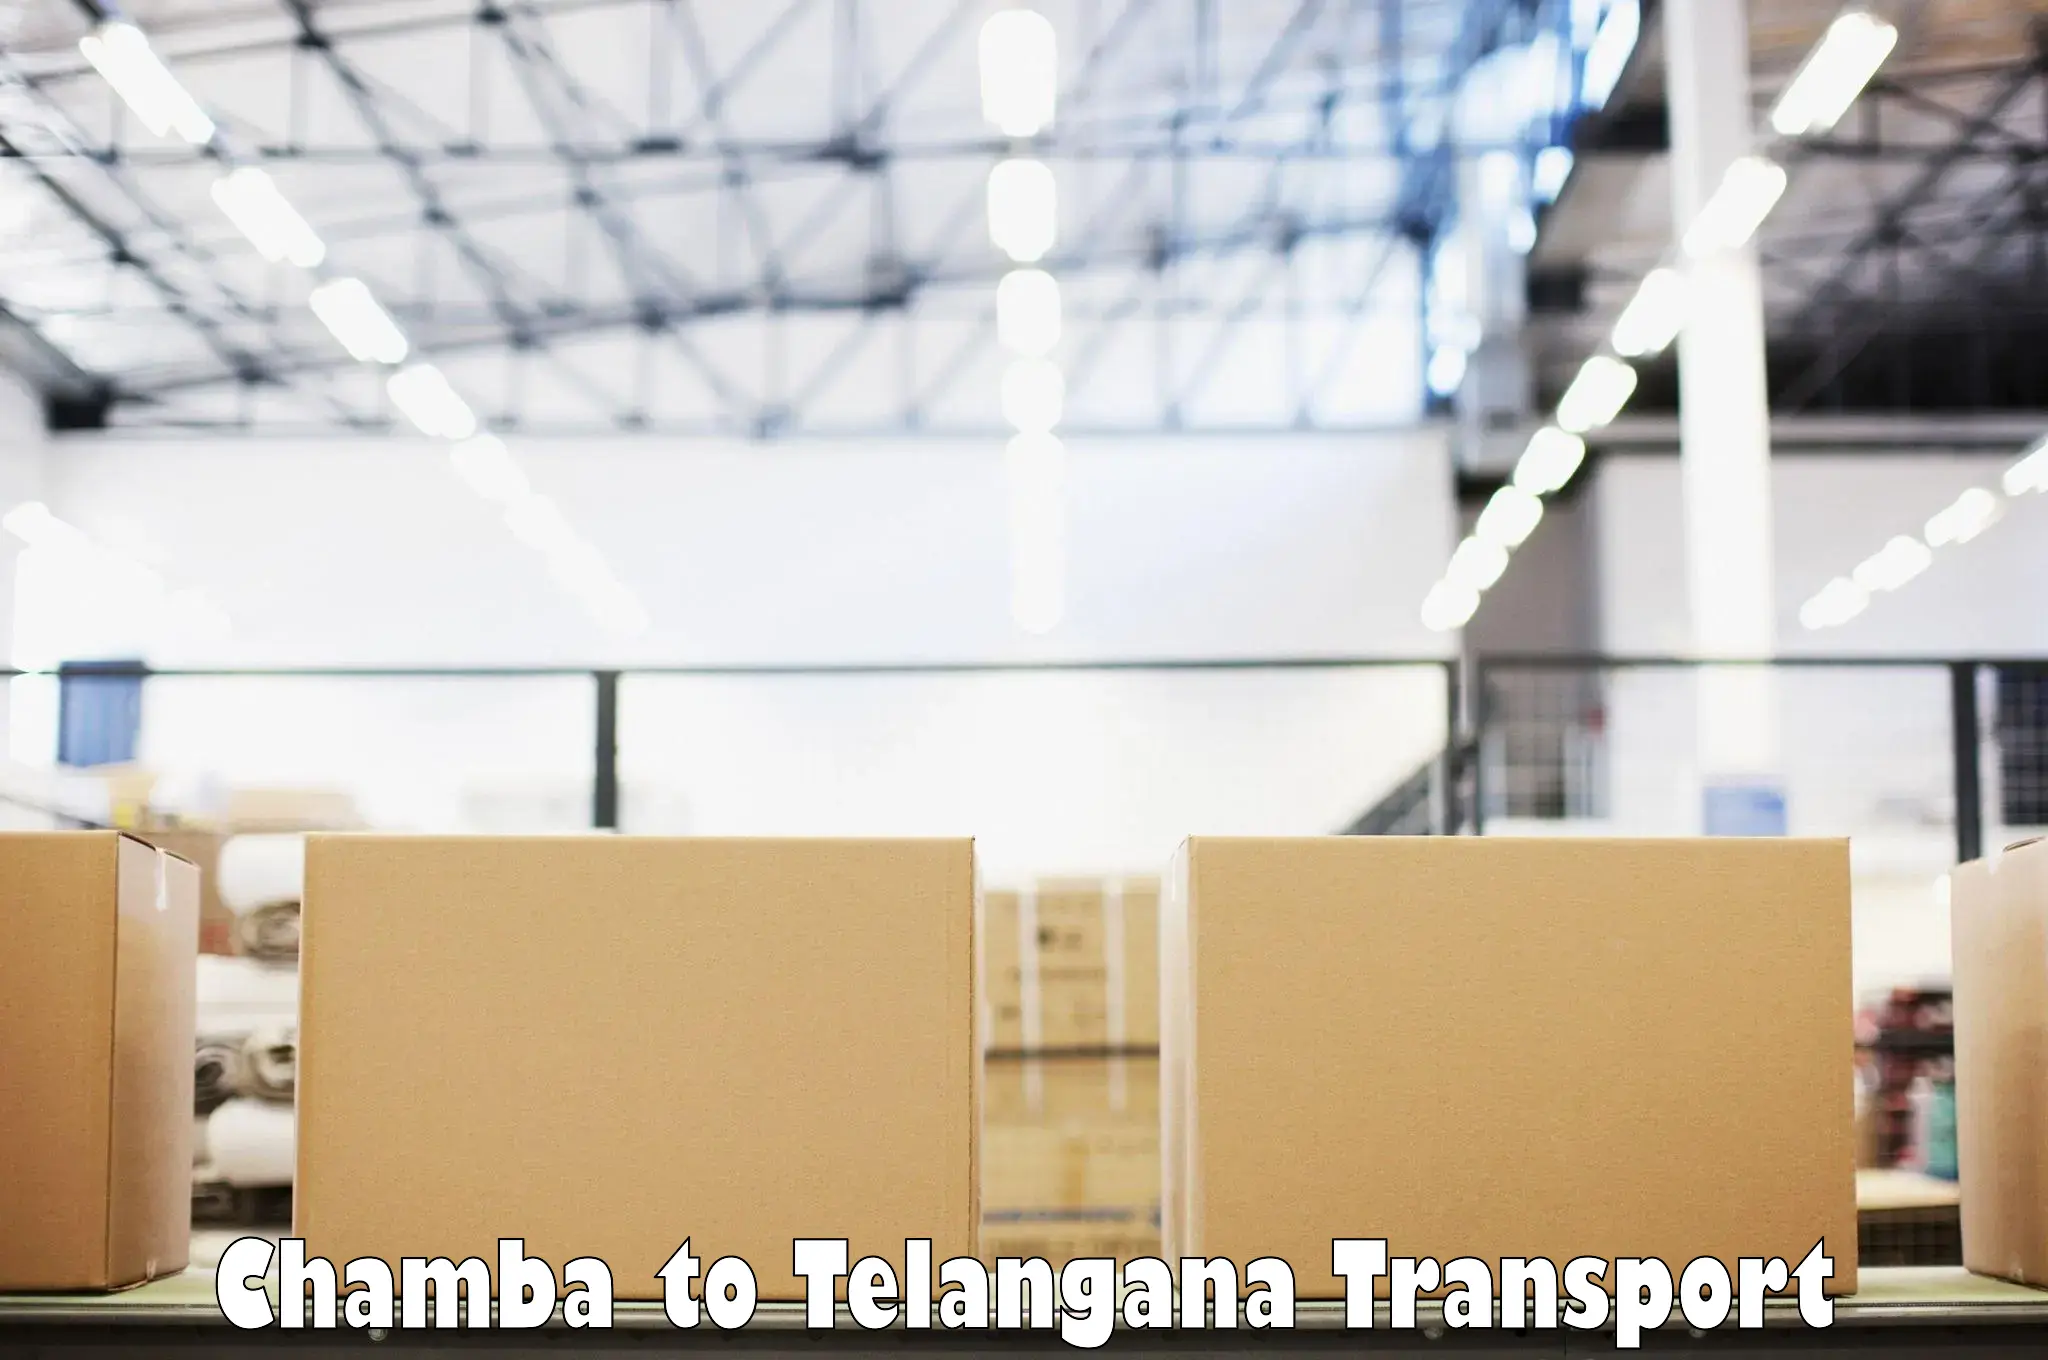 Parcel transport services in Chamba to Trimulgherry